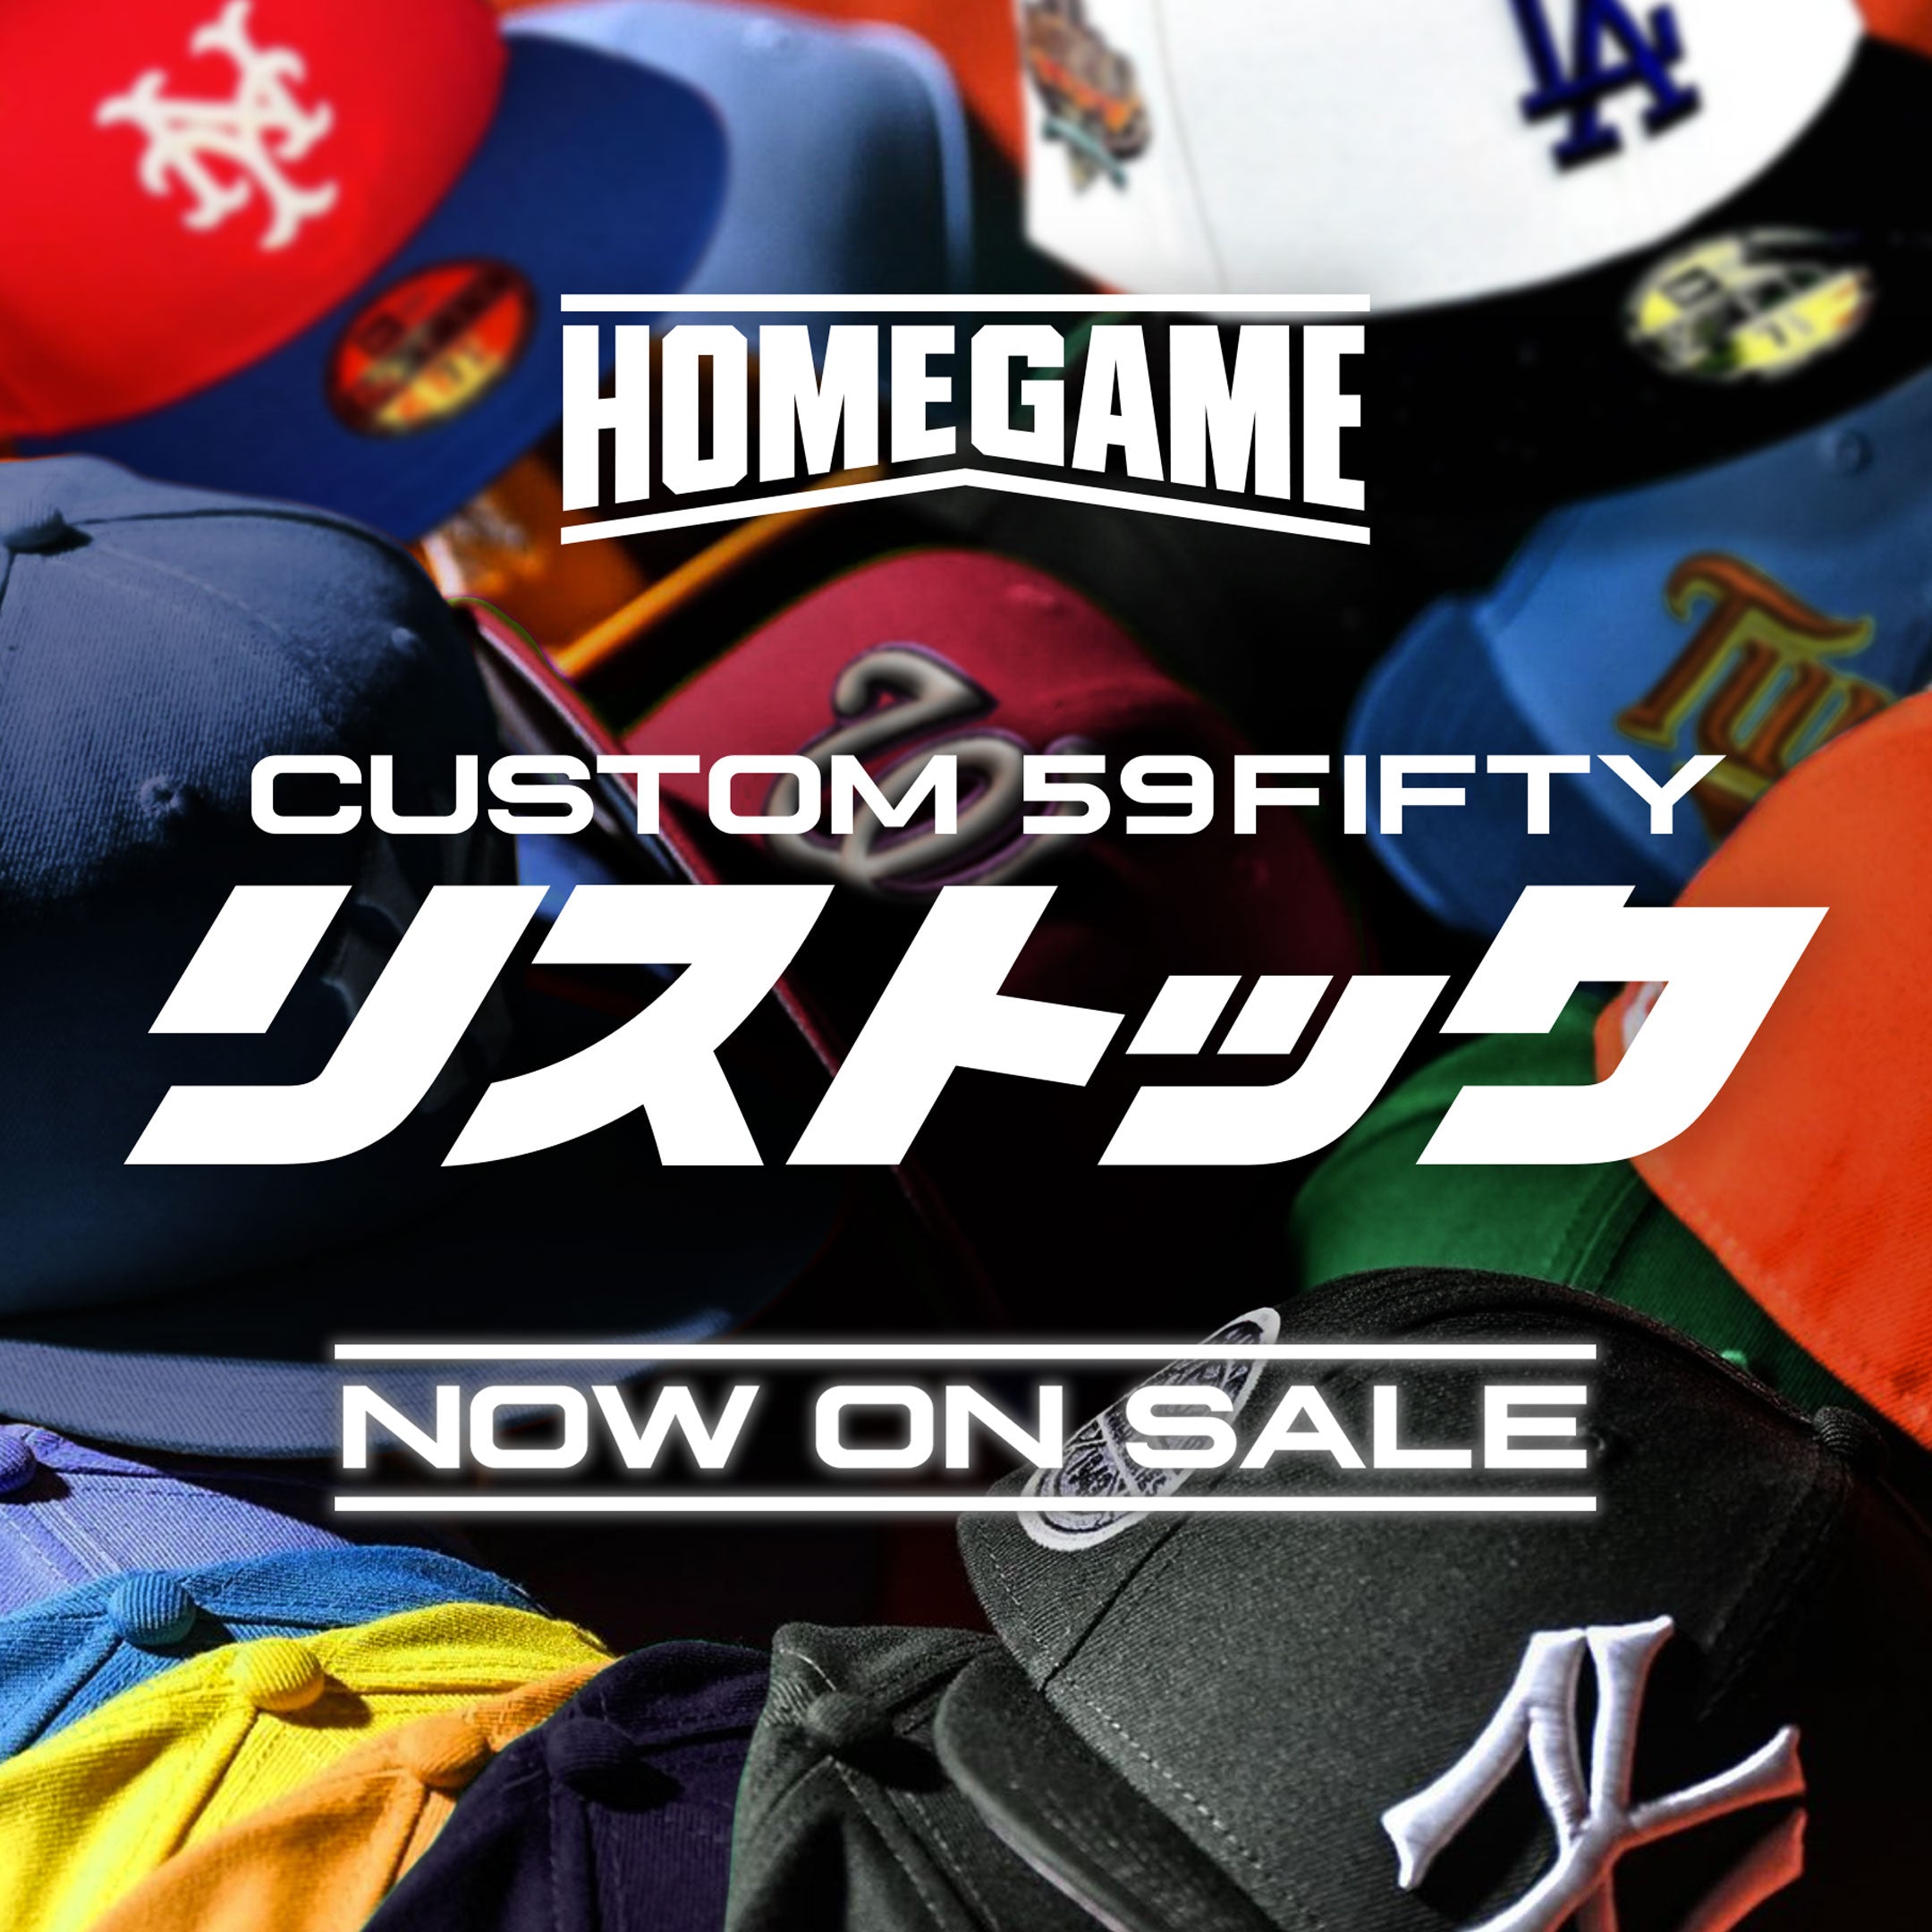 HOMEGAME TOKYO 公式通販サイト